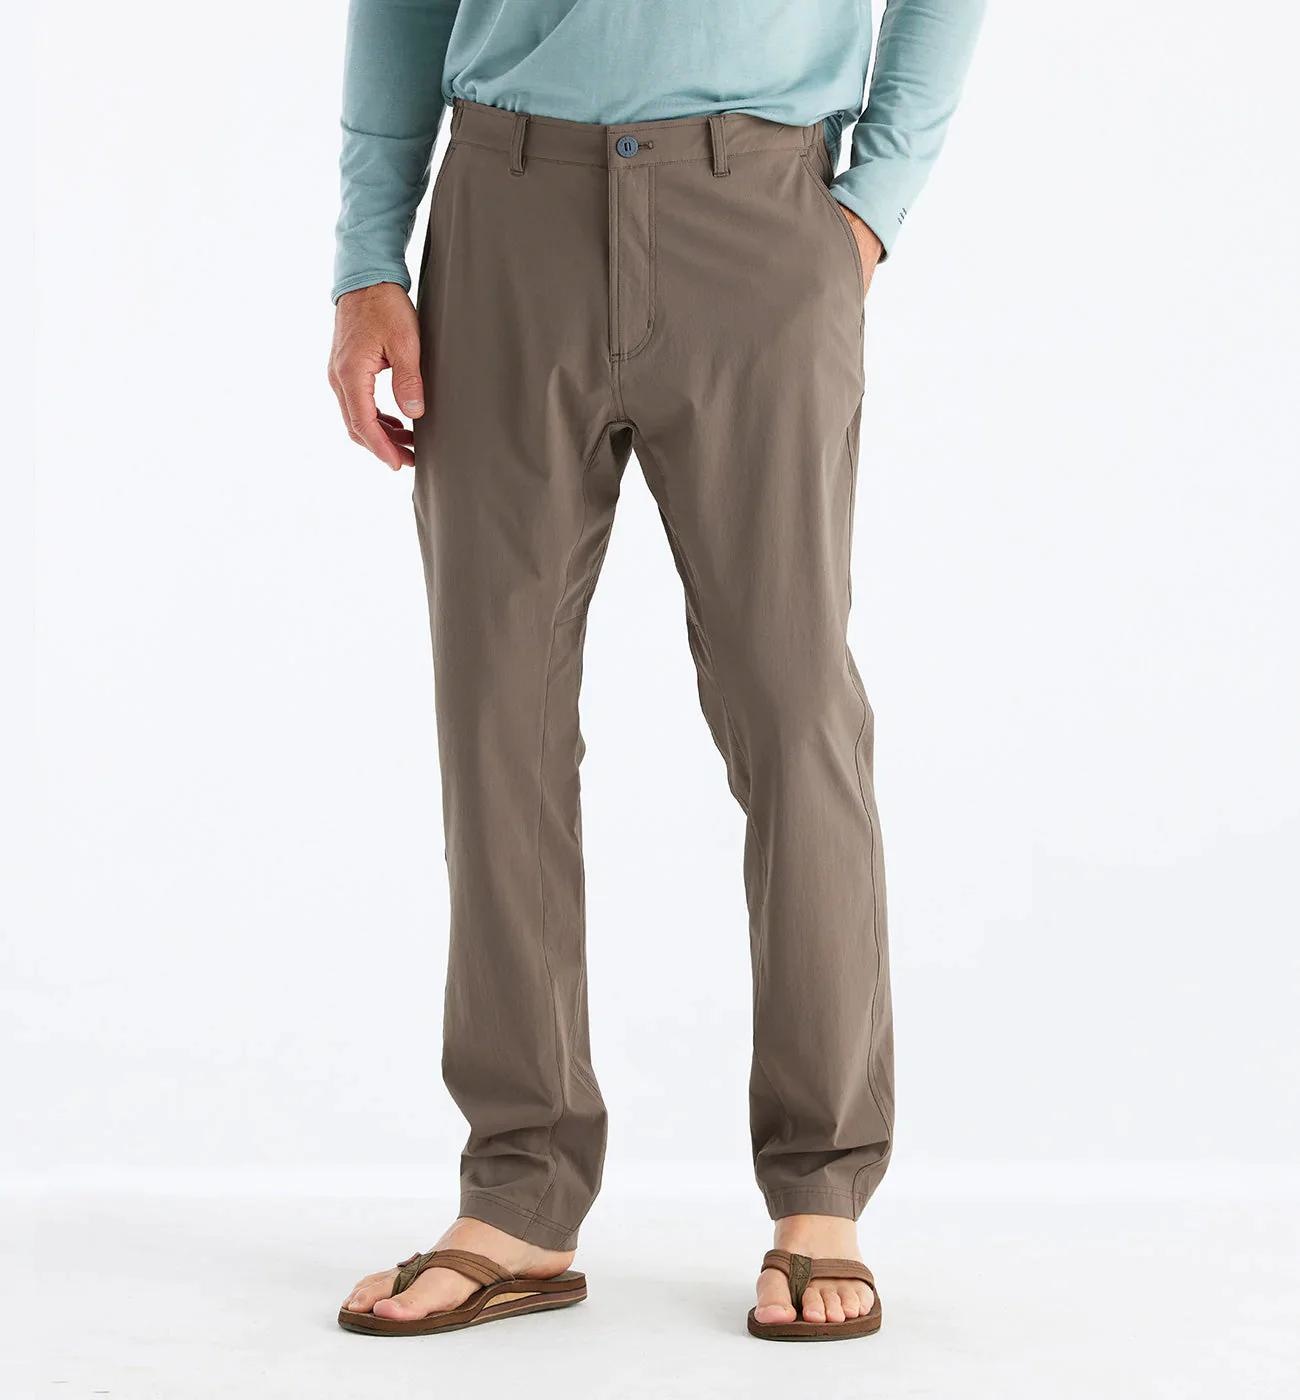 Men's Latitude Pant - The Benchmark Outdoor Outfitters